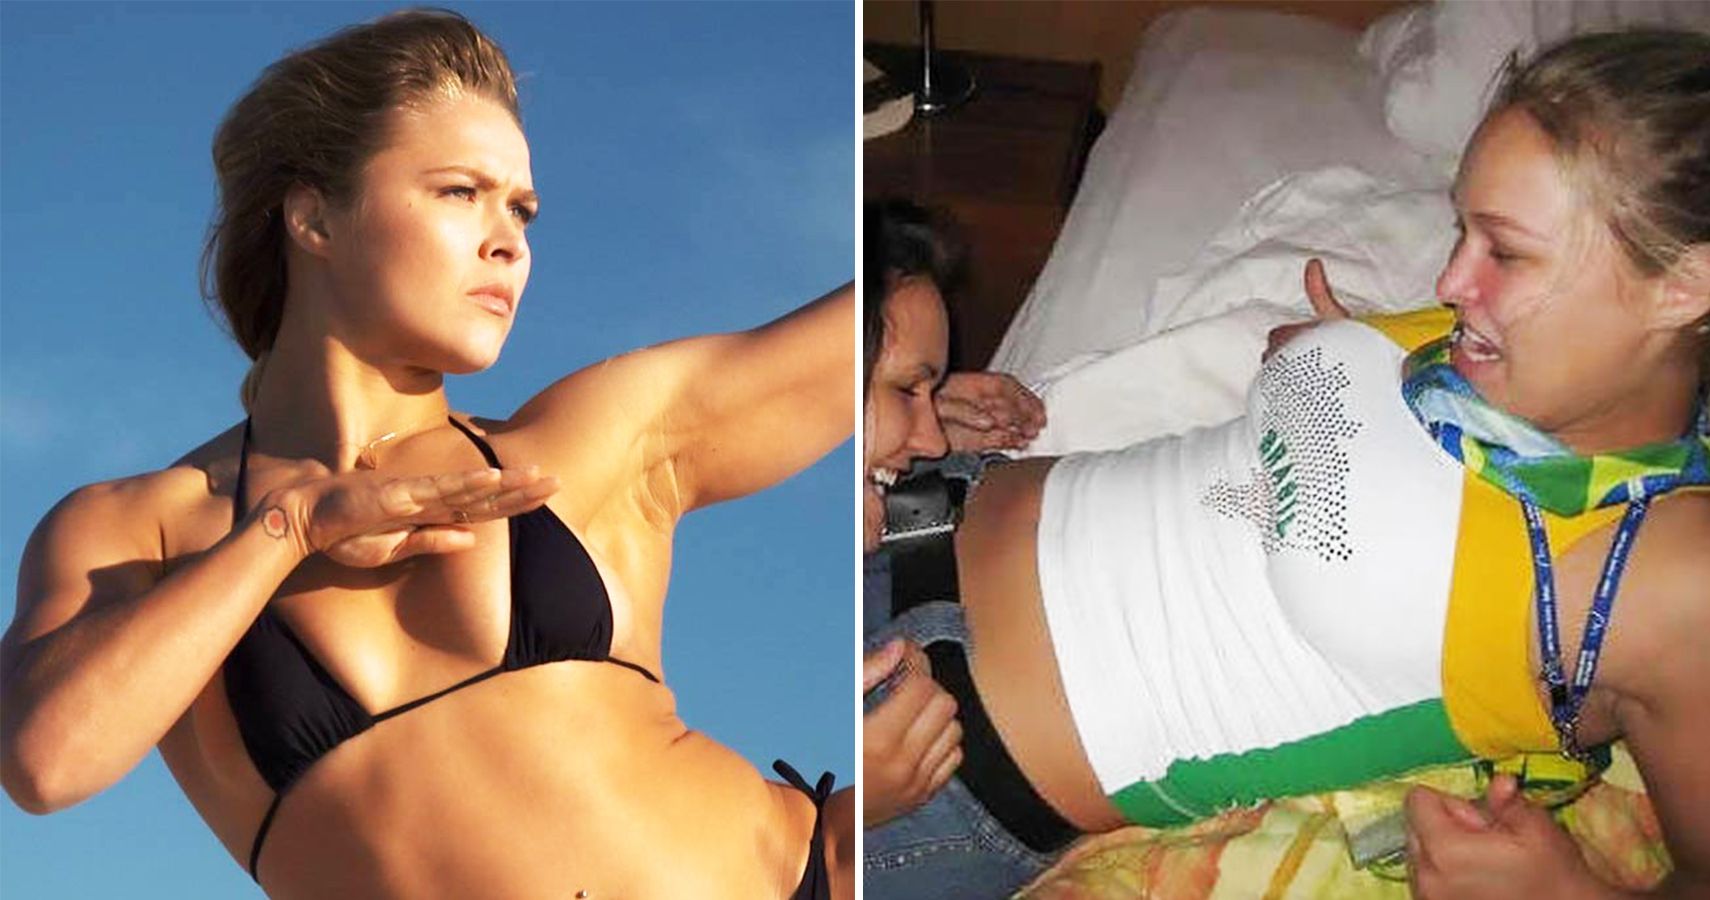 Top 8 Pictures Ronda Rousey Wants You To See And 7 She DOESN'T